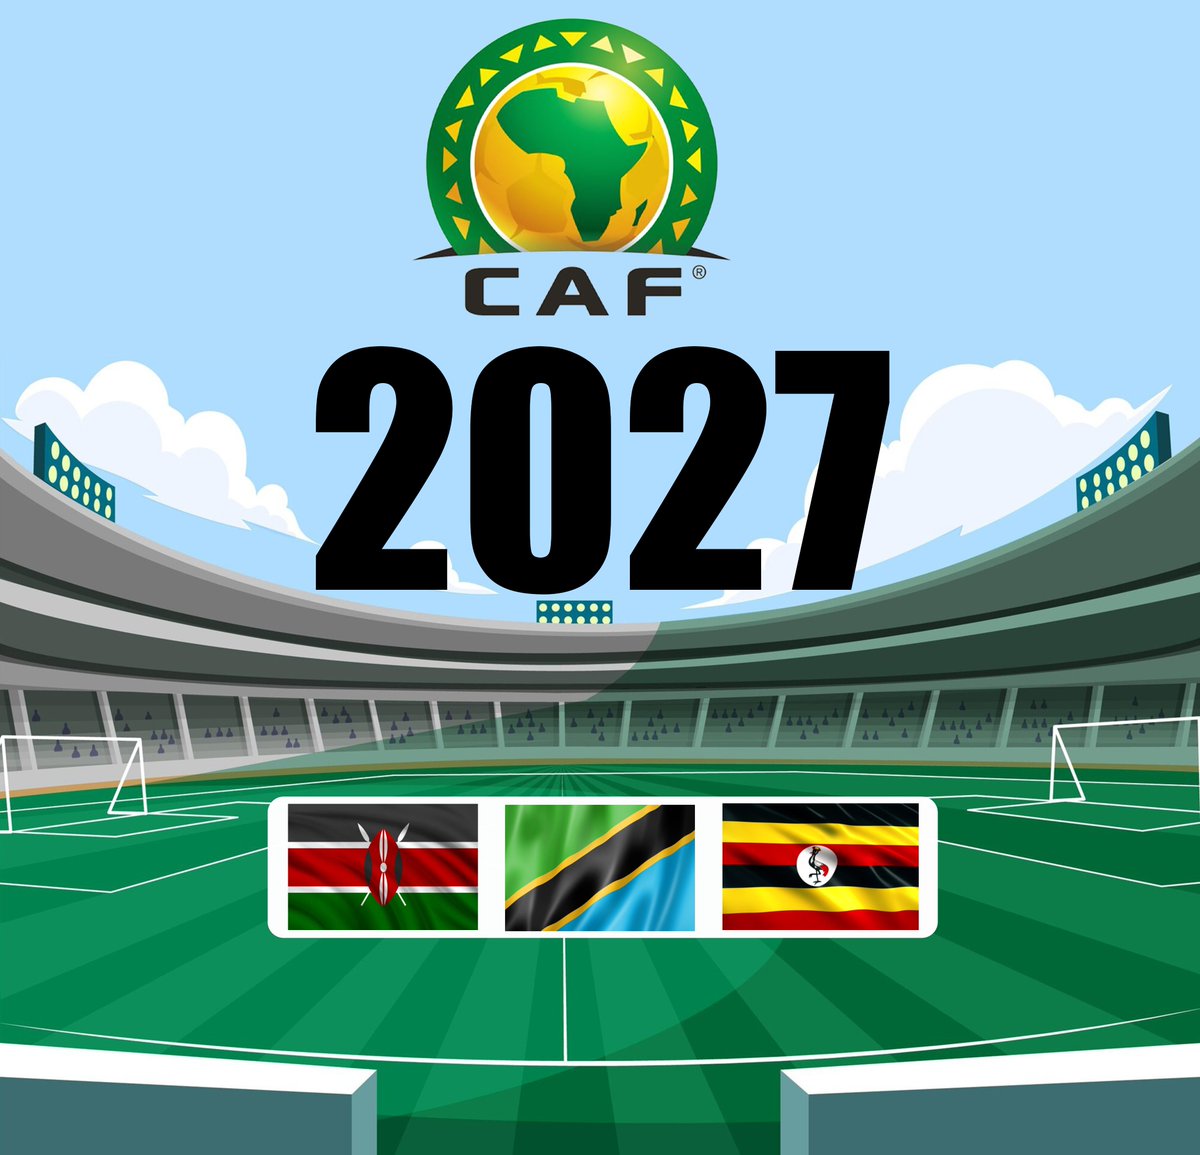 East Africa you better be ready for @AFCON_2027..😉

Arsenal | Nick Odhiambo | Sharon Lokedi | #Mpesa